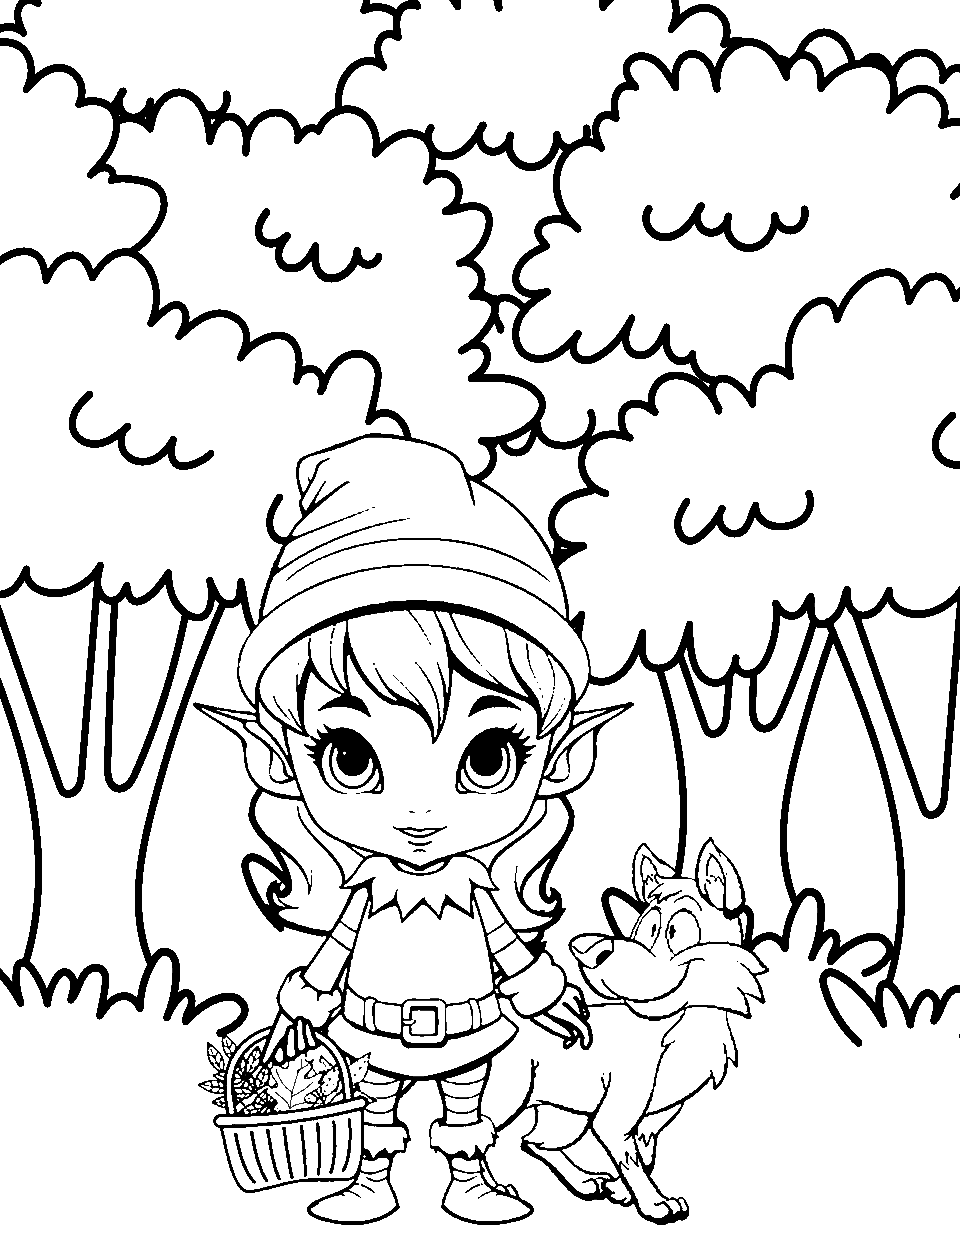 Elf with a Pet Fox Coloring Page - An elf walking through the forest with a friendly fox.